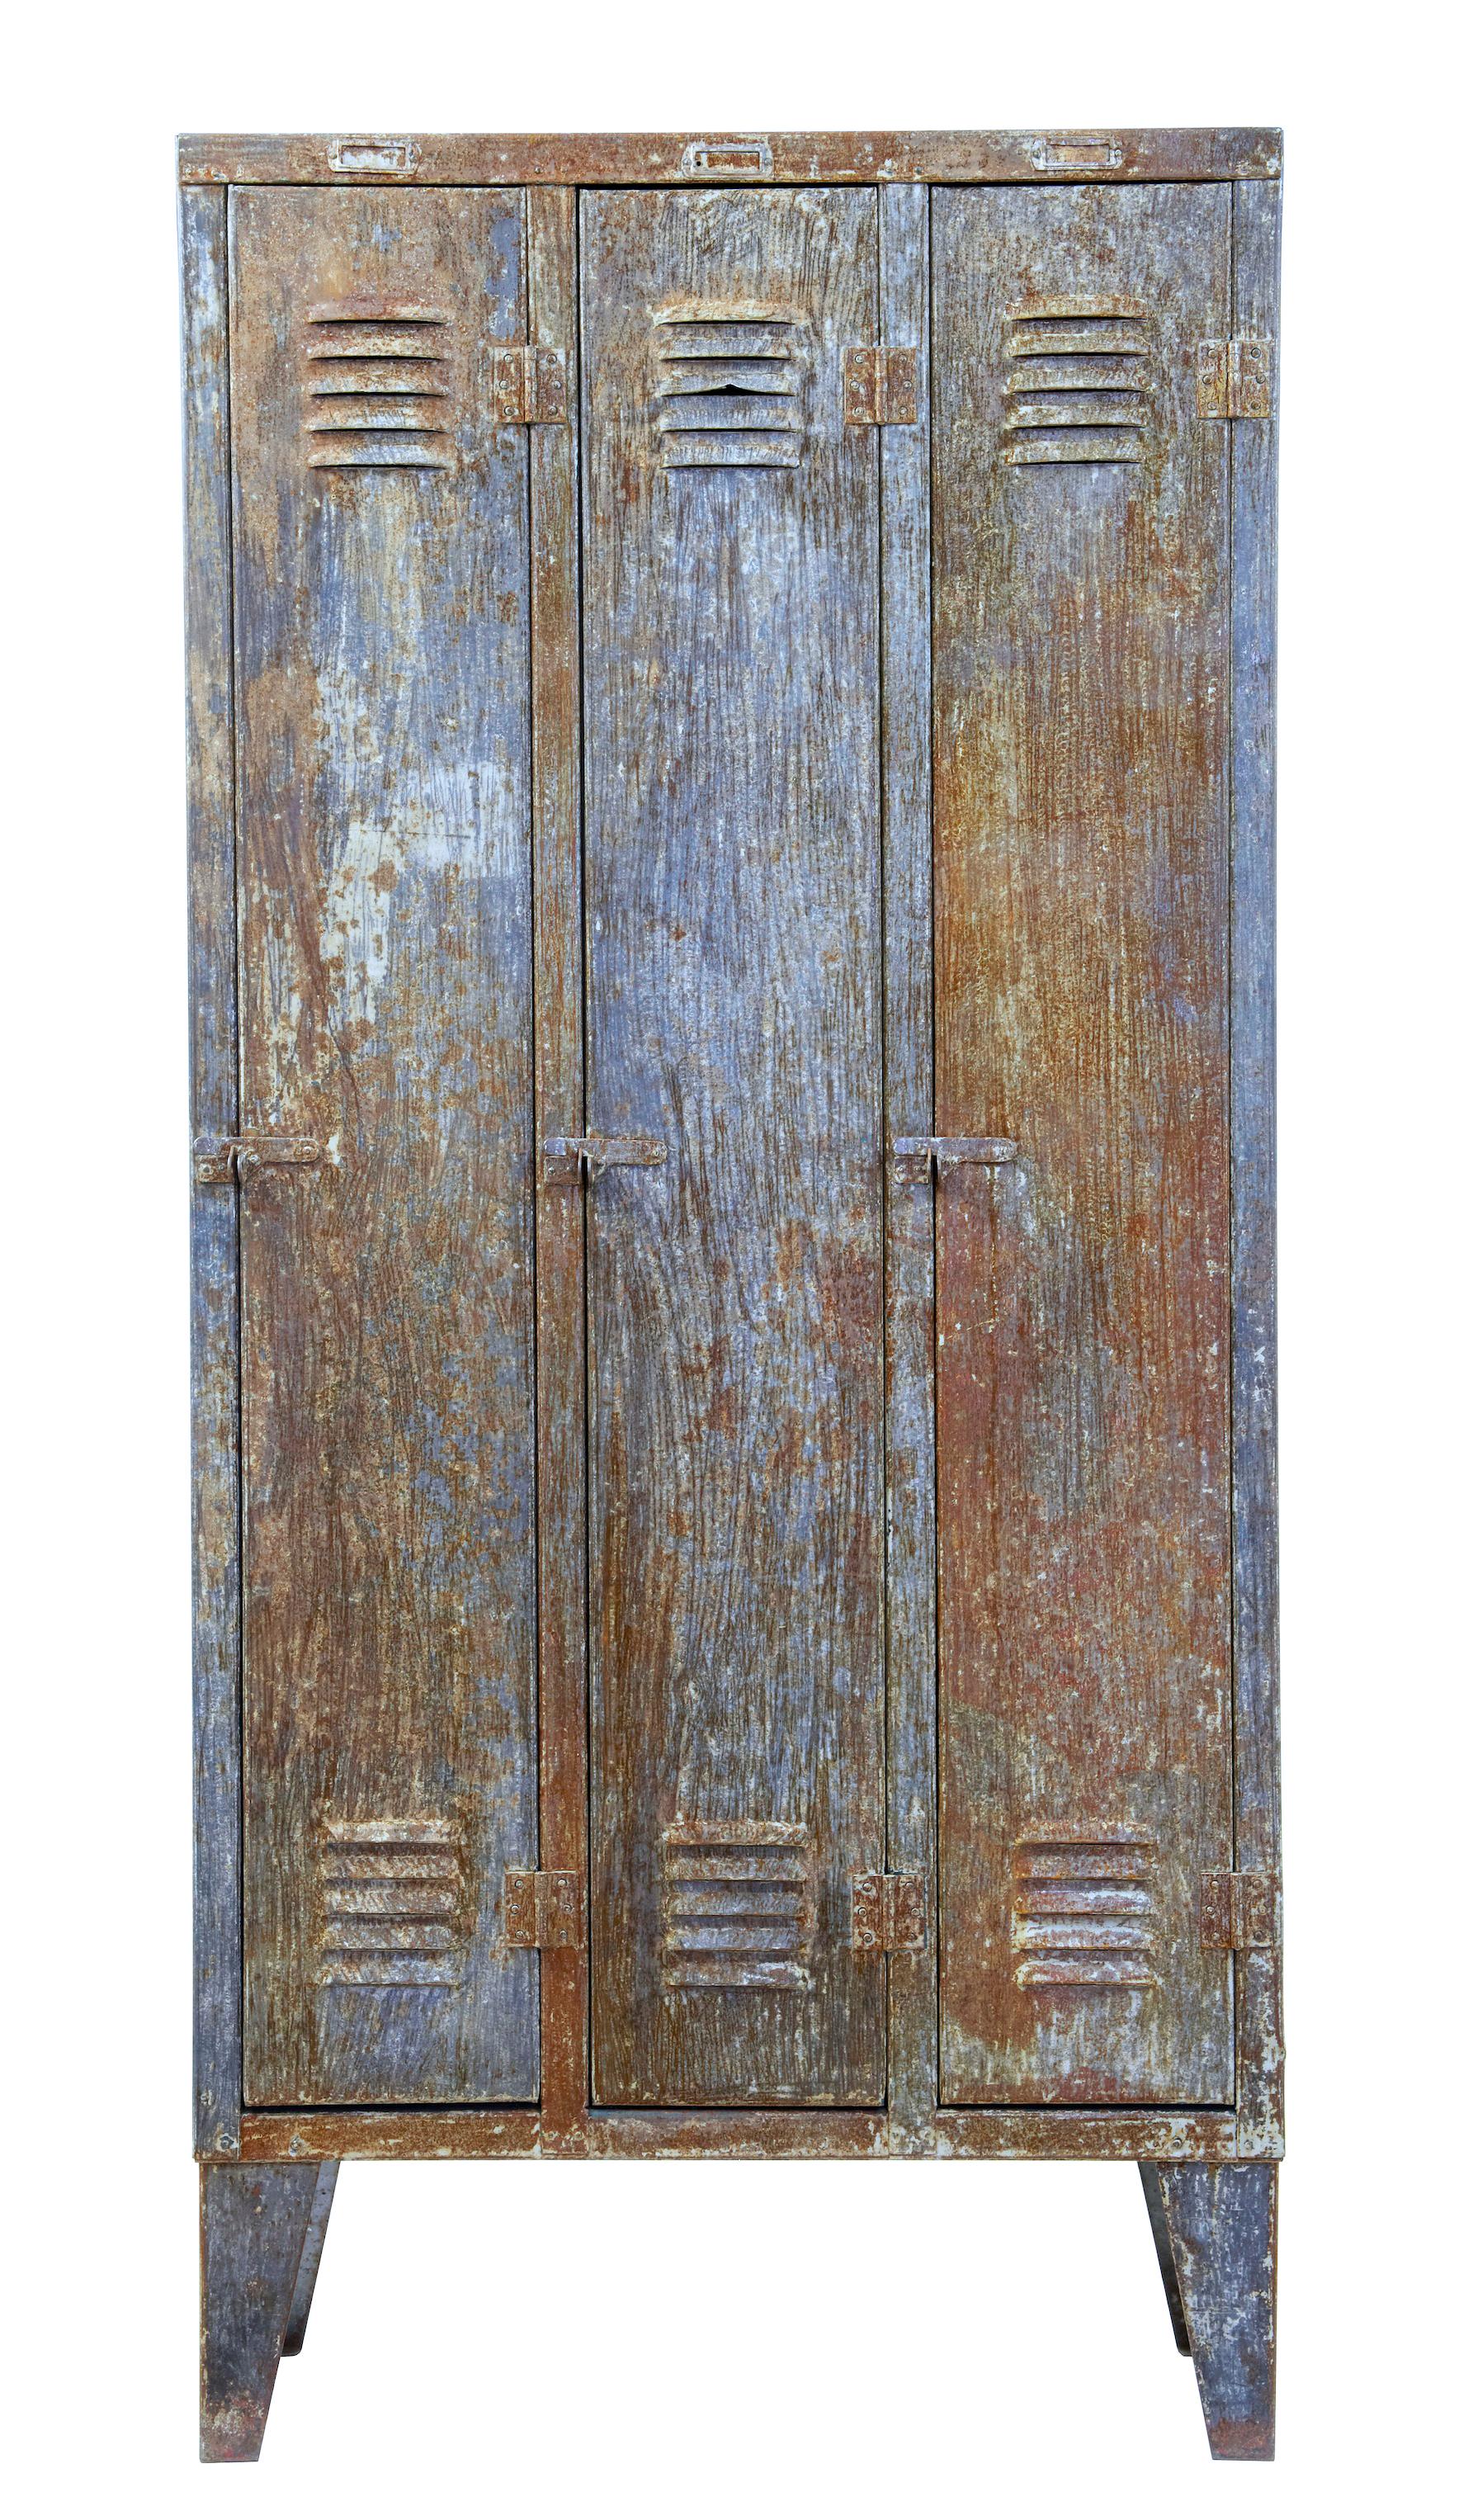 Mid-20th century distressed industrial cabinet, circa 1960.

3-door cabinet with a single shelf in each compartment. Metal distressed to give a weathered appearance.